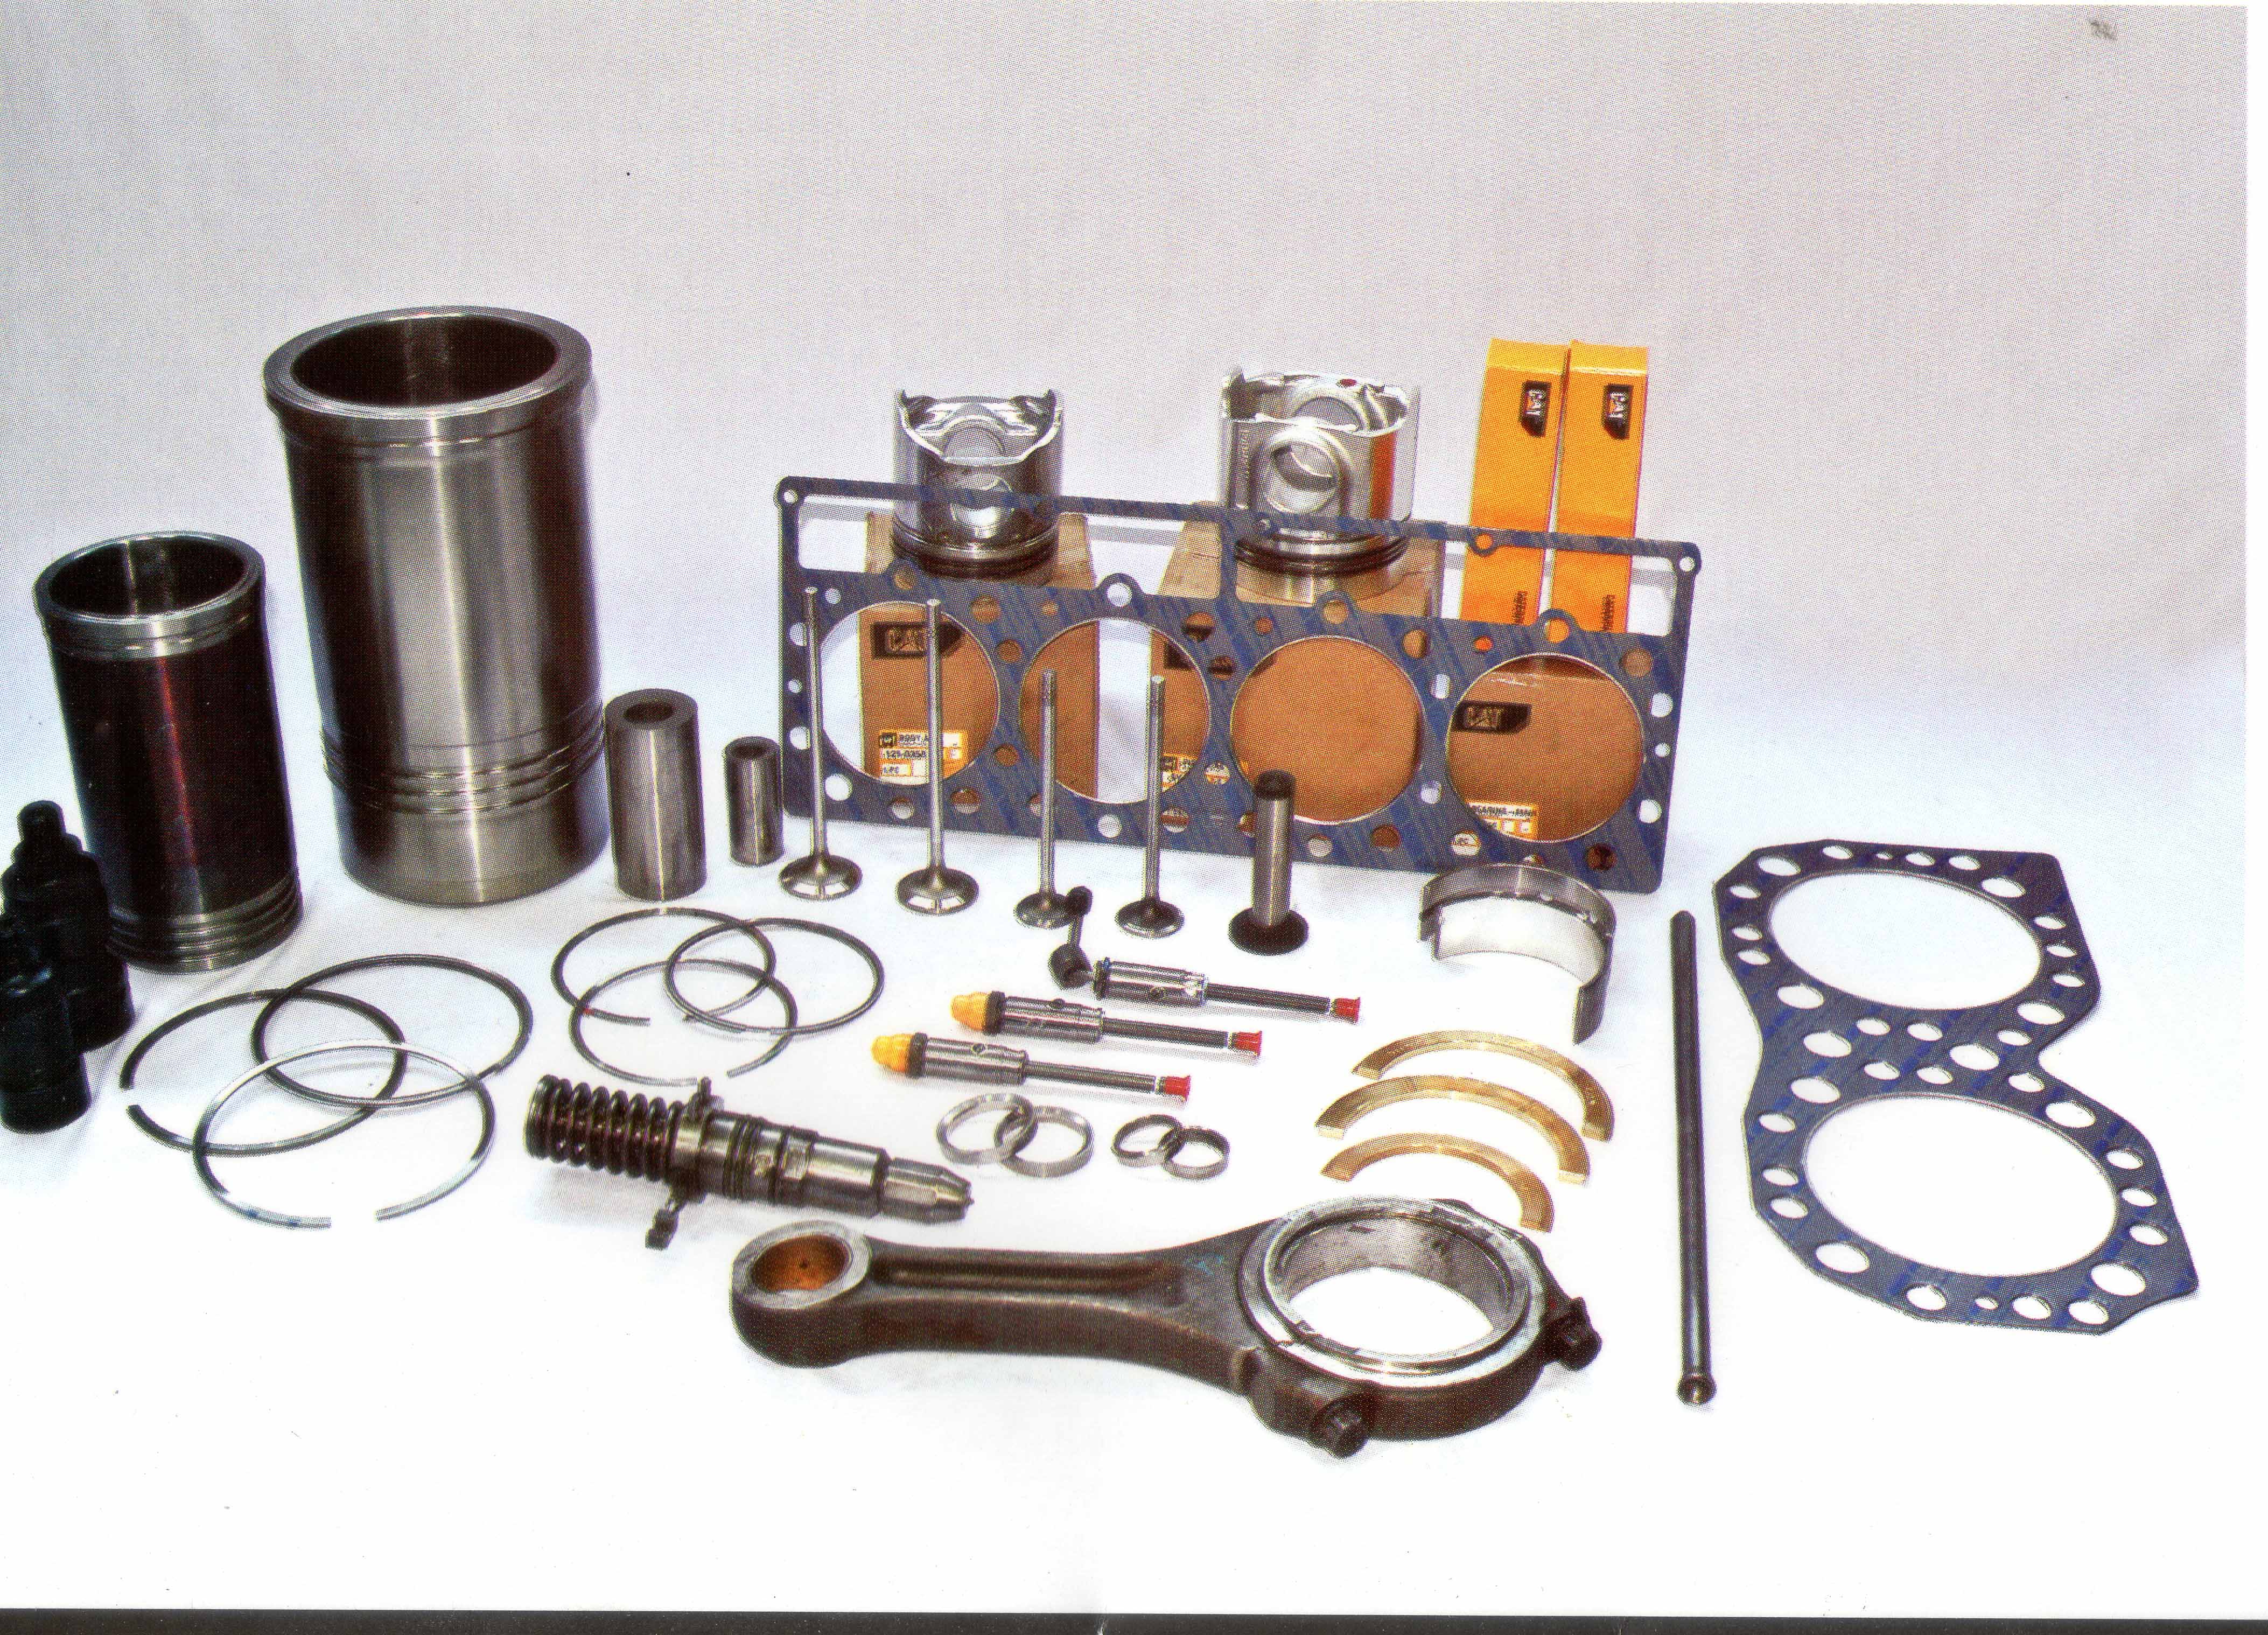 Запчасти м5. Т333-2 32.6СС запчасти. Komatsu spare Parts. Forklift spare Parts. Spare Parts 3 forklift.